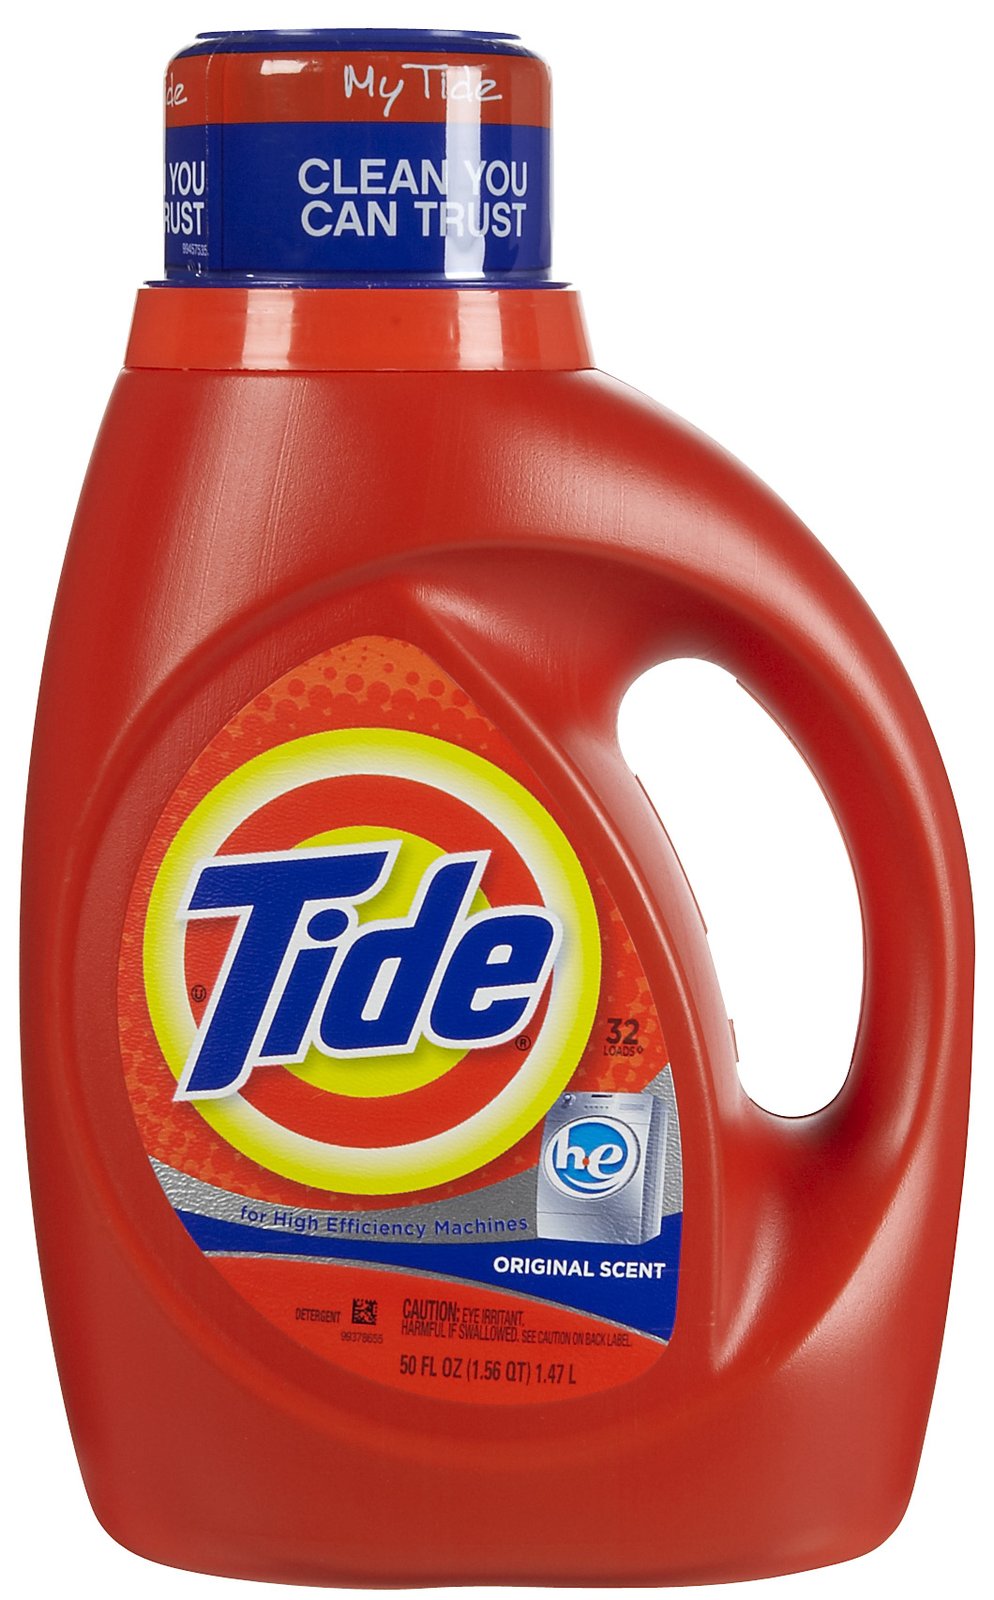 What’s in your laundry detergent?